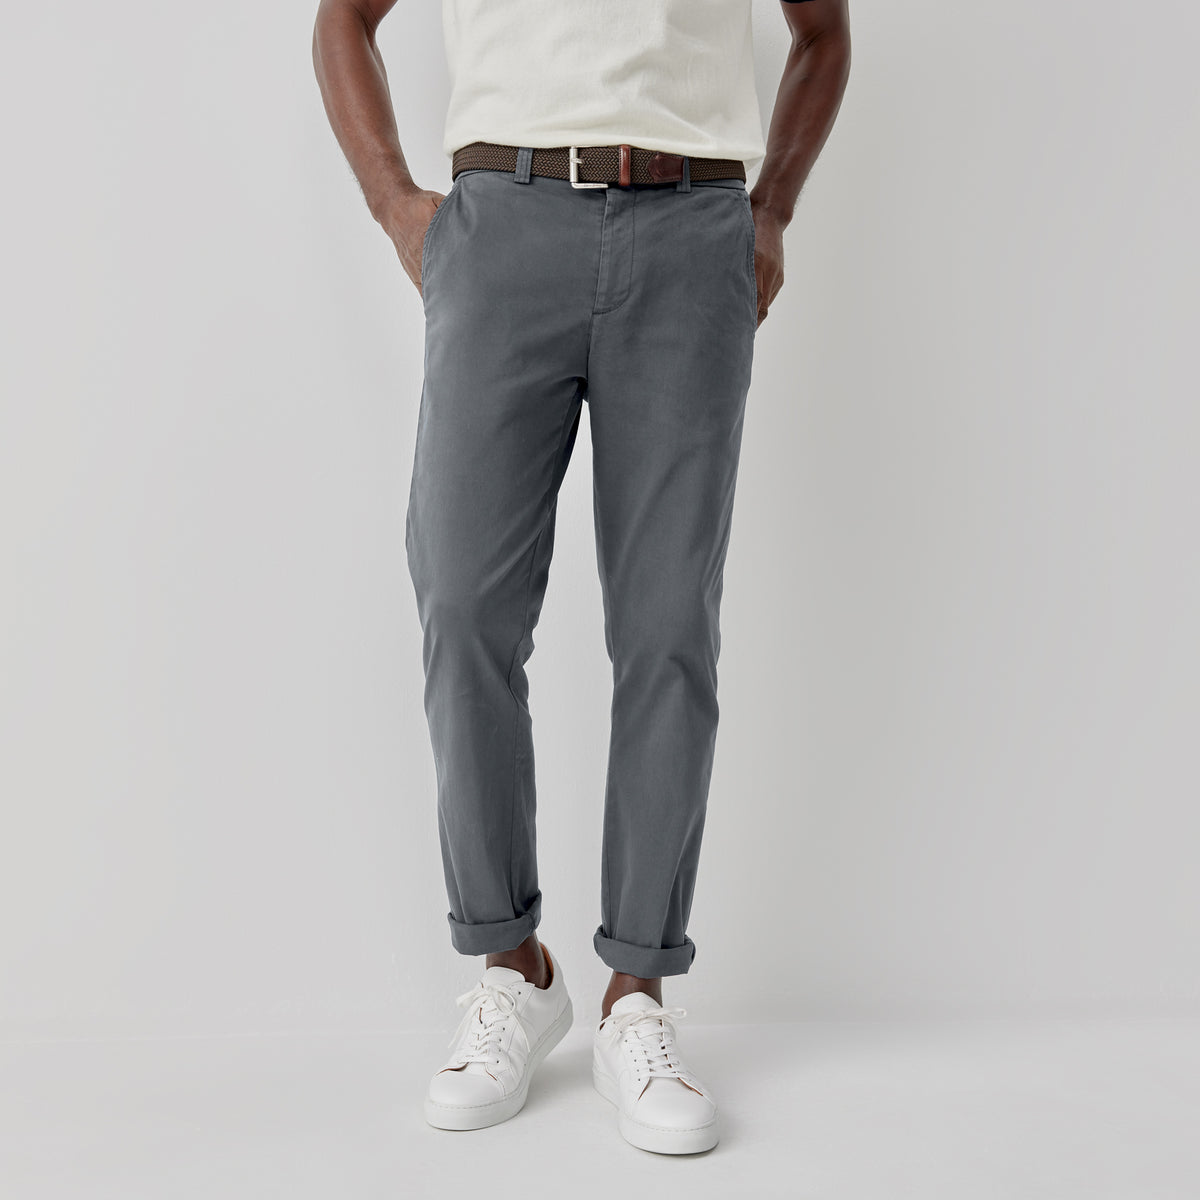 Besterios Slate Cotton Chinos | Men's Chinos | Oliver Sweeney